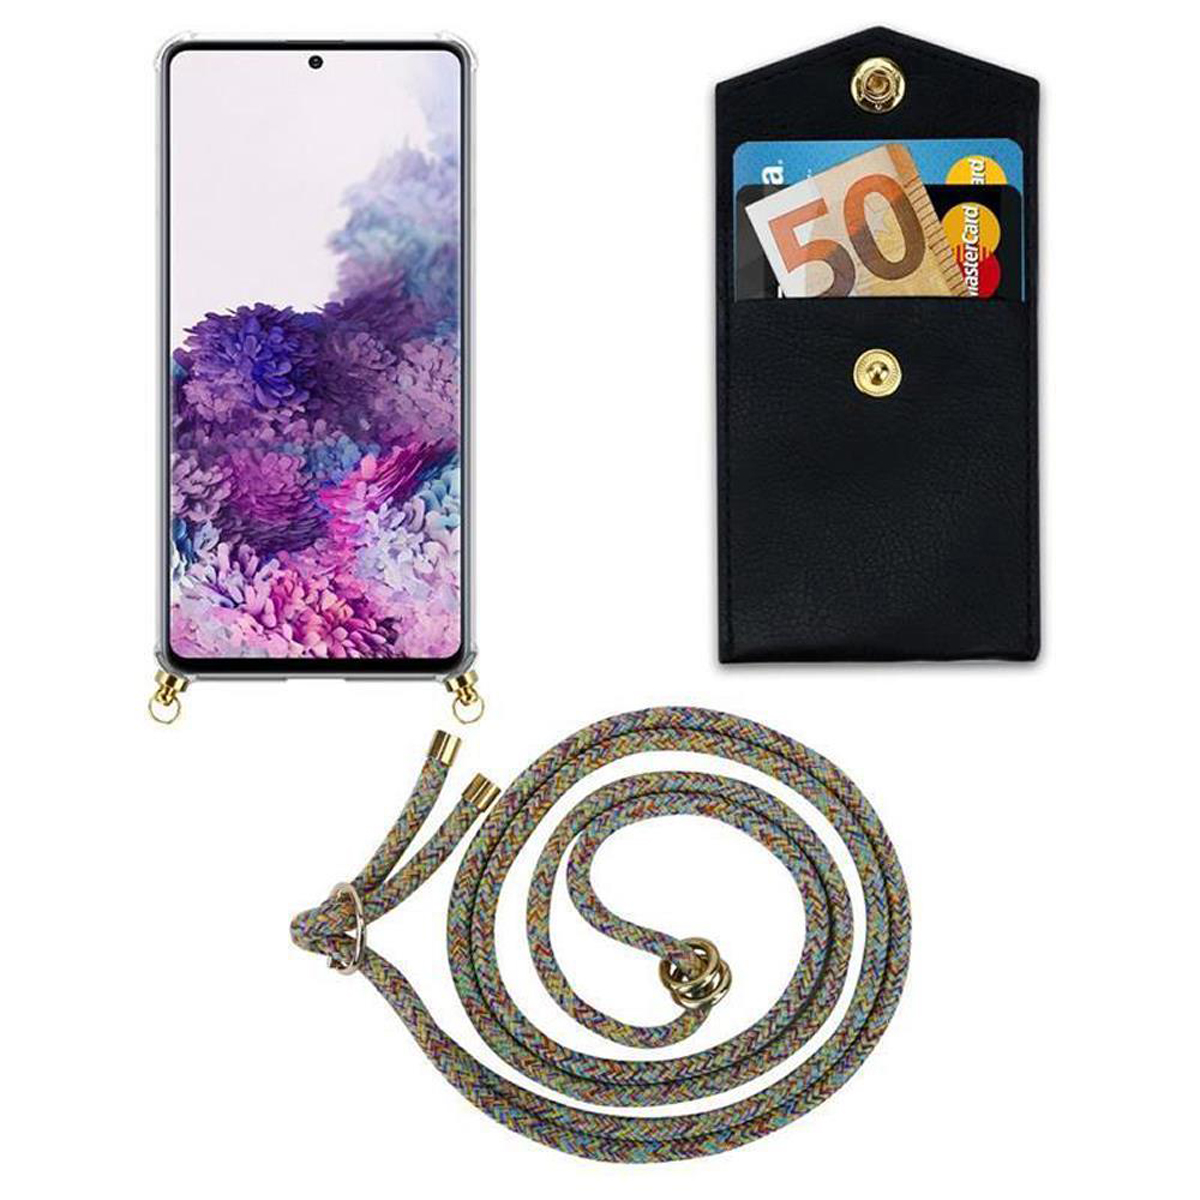 mit und Band Samsung, abnehmbarer Hülle, M40s, 4G CADORABO Galaxy Kordel / Handy Backcover, Ringen, RAINBOW A51 Gold Kette